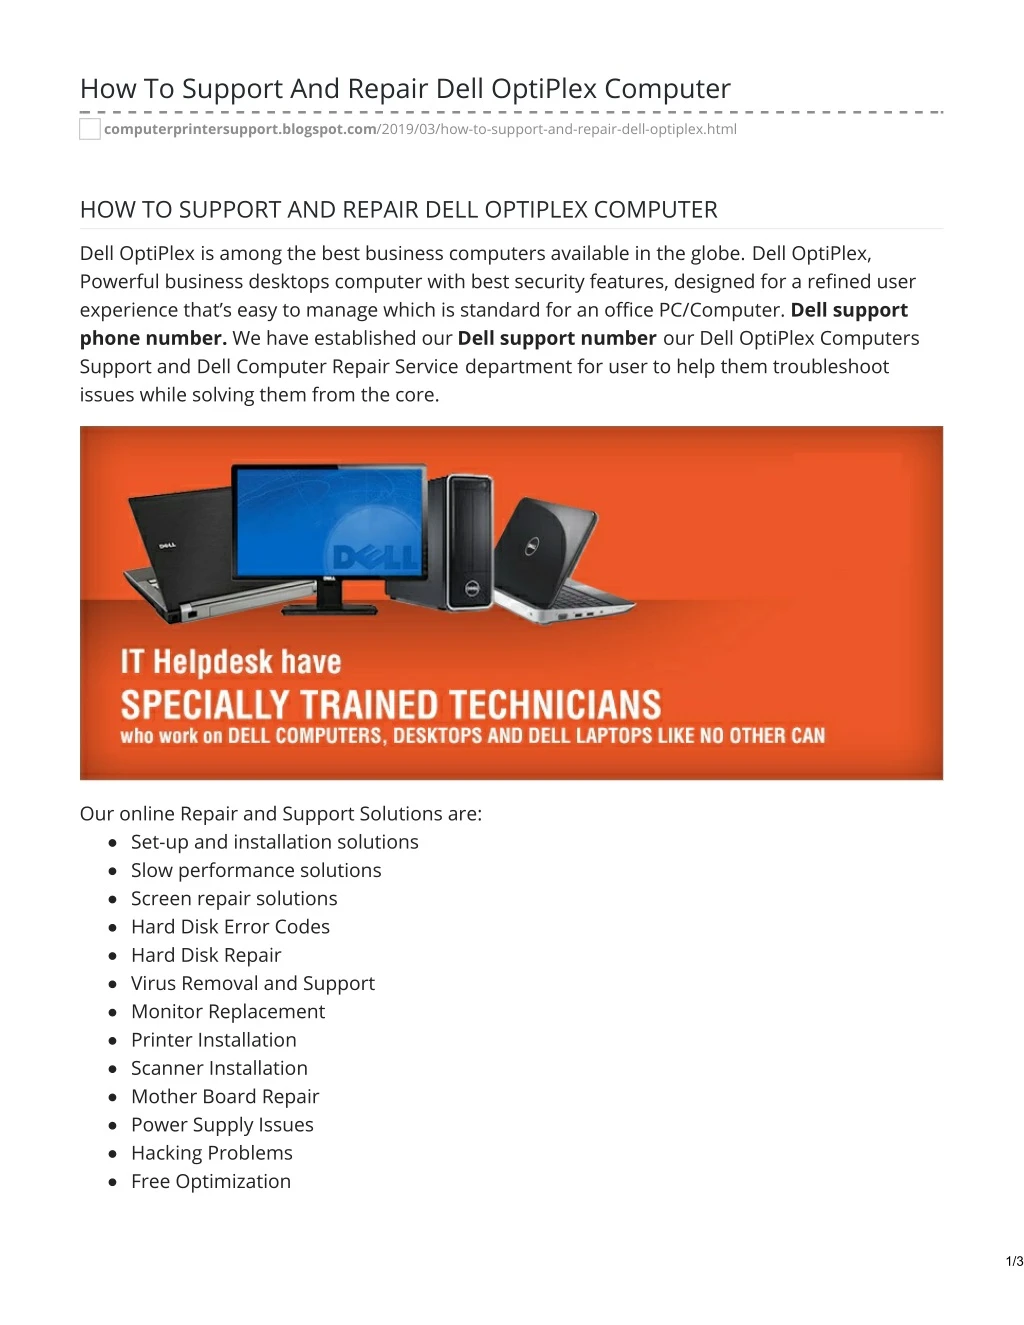 how to support and repair dell optiplex computer